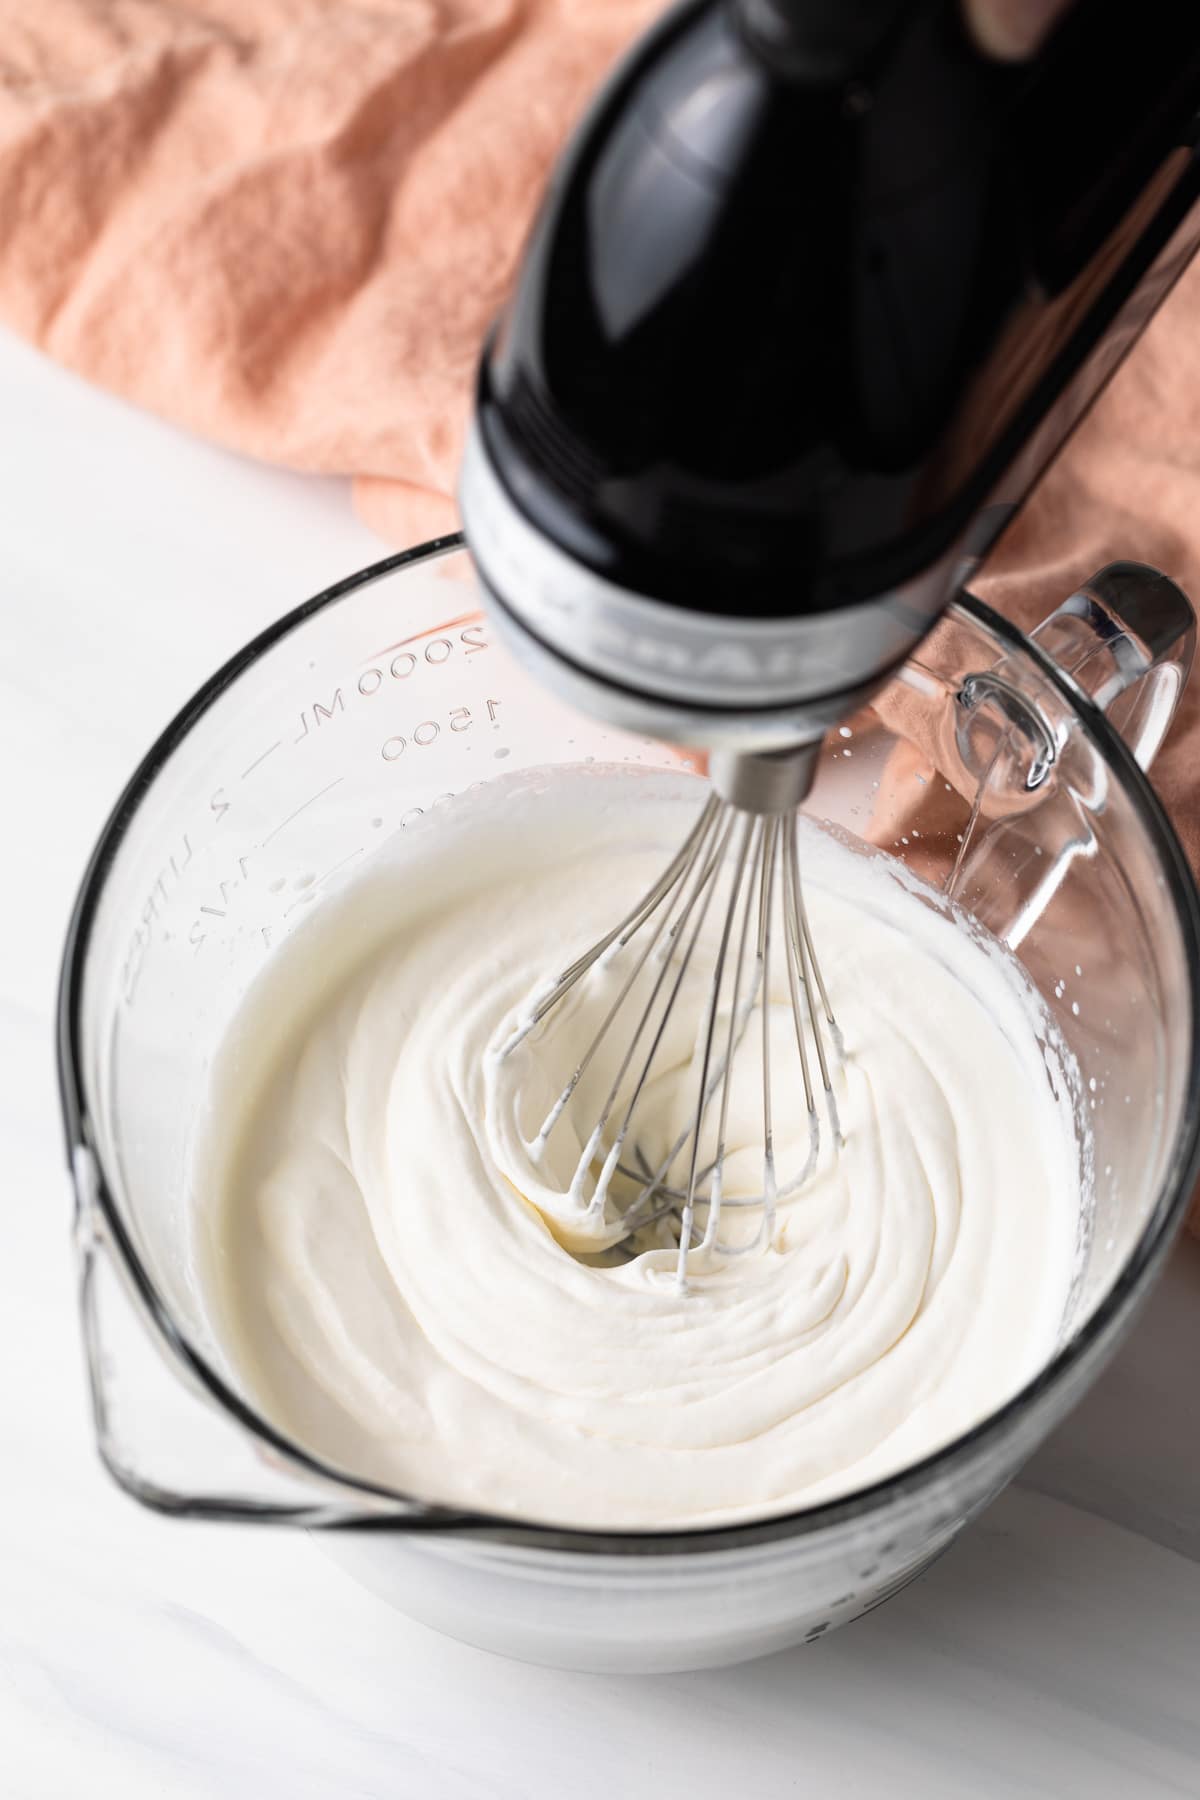 mixer whipping cream in a glass bowl